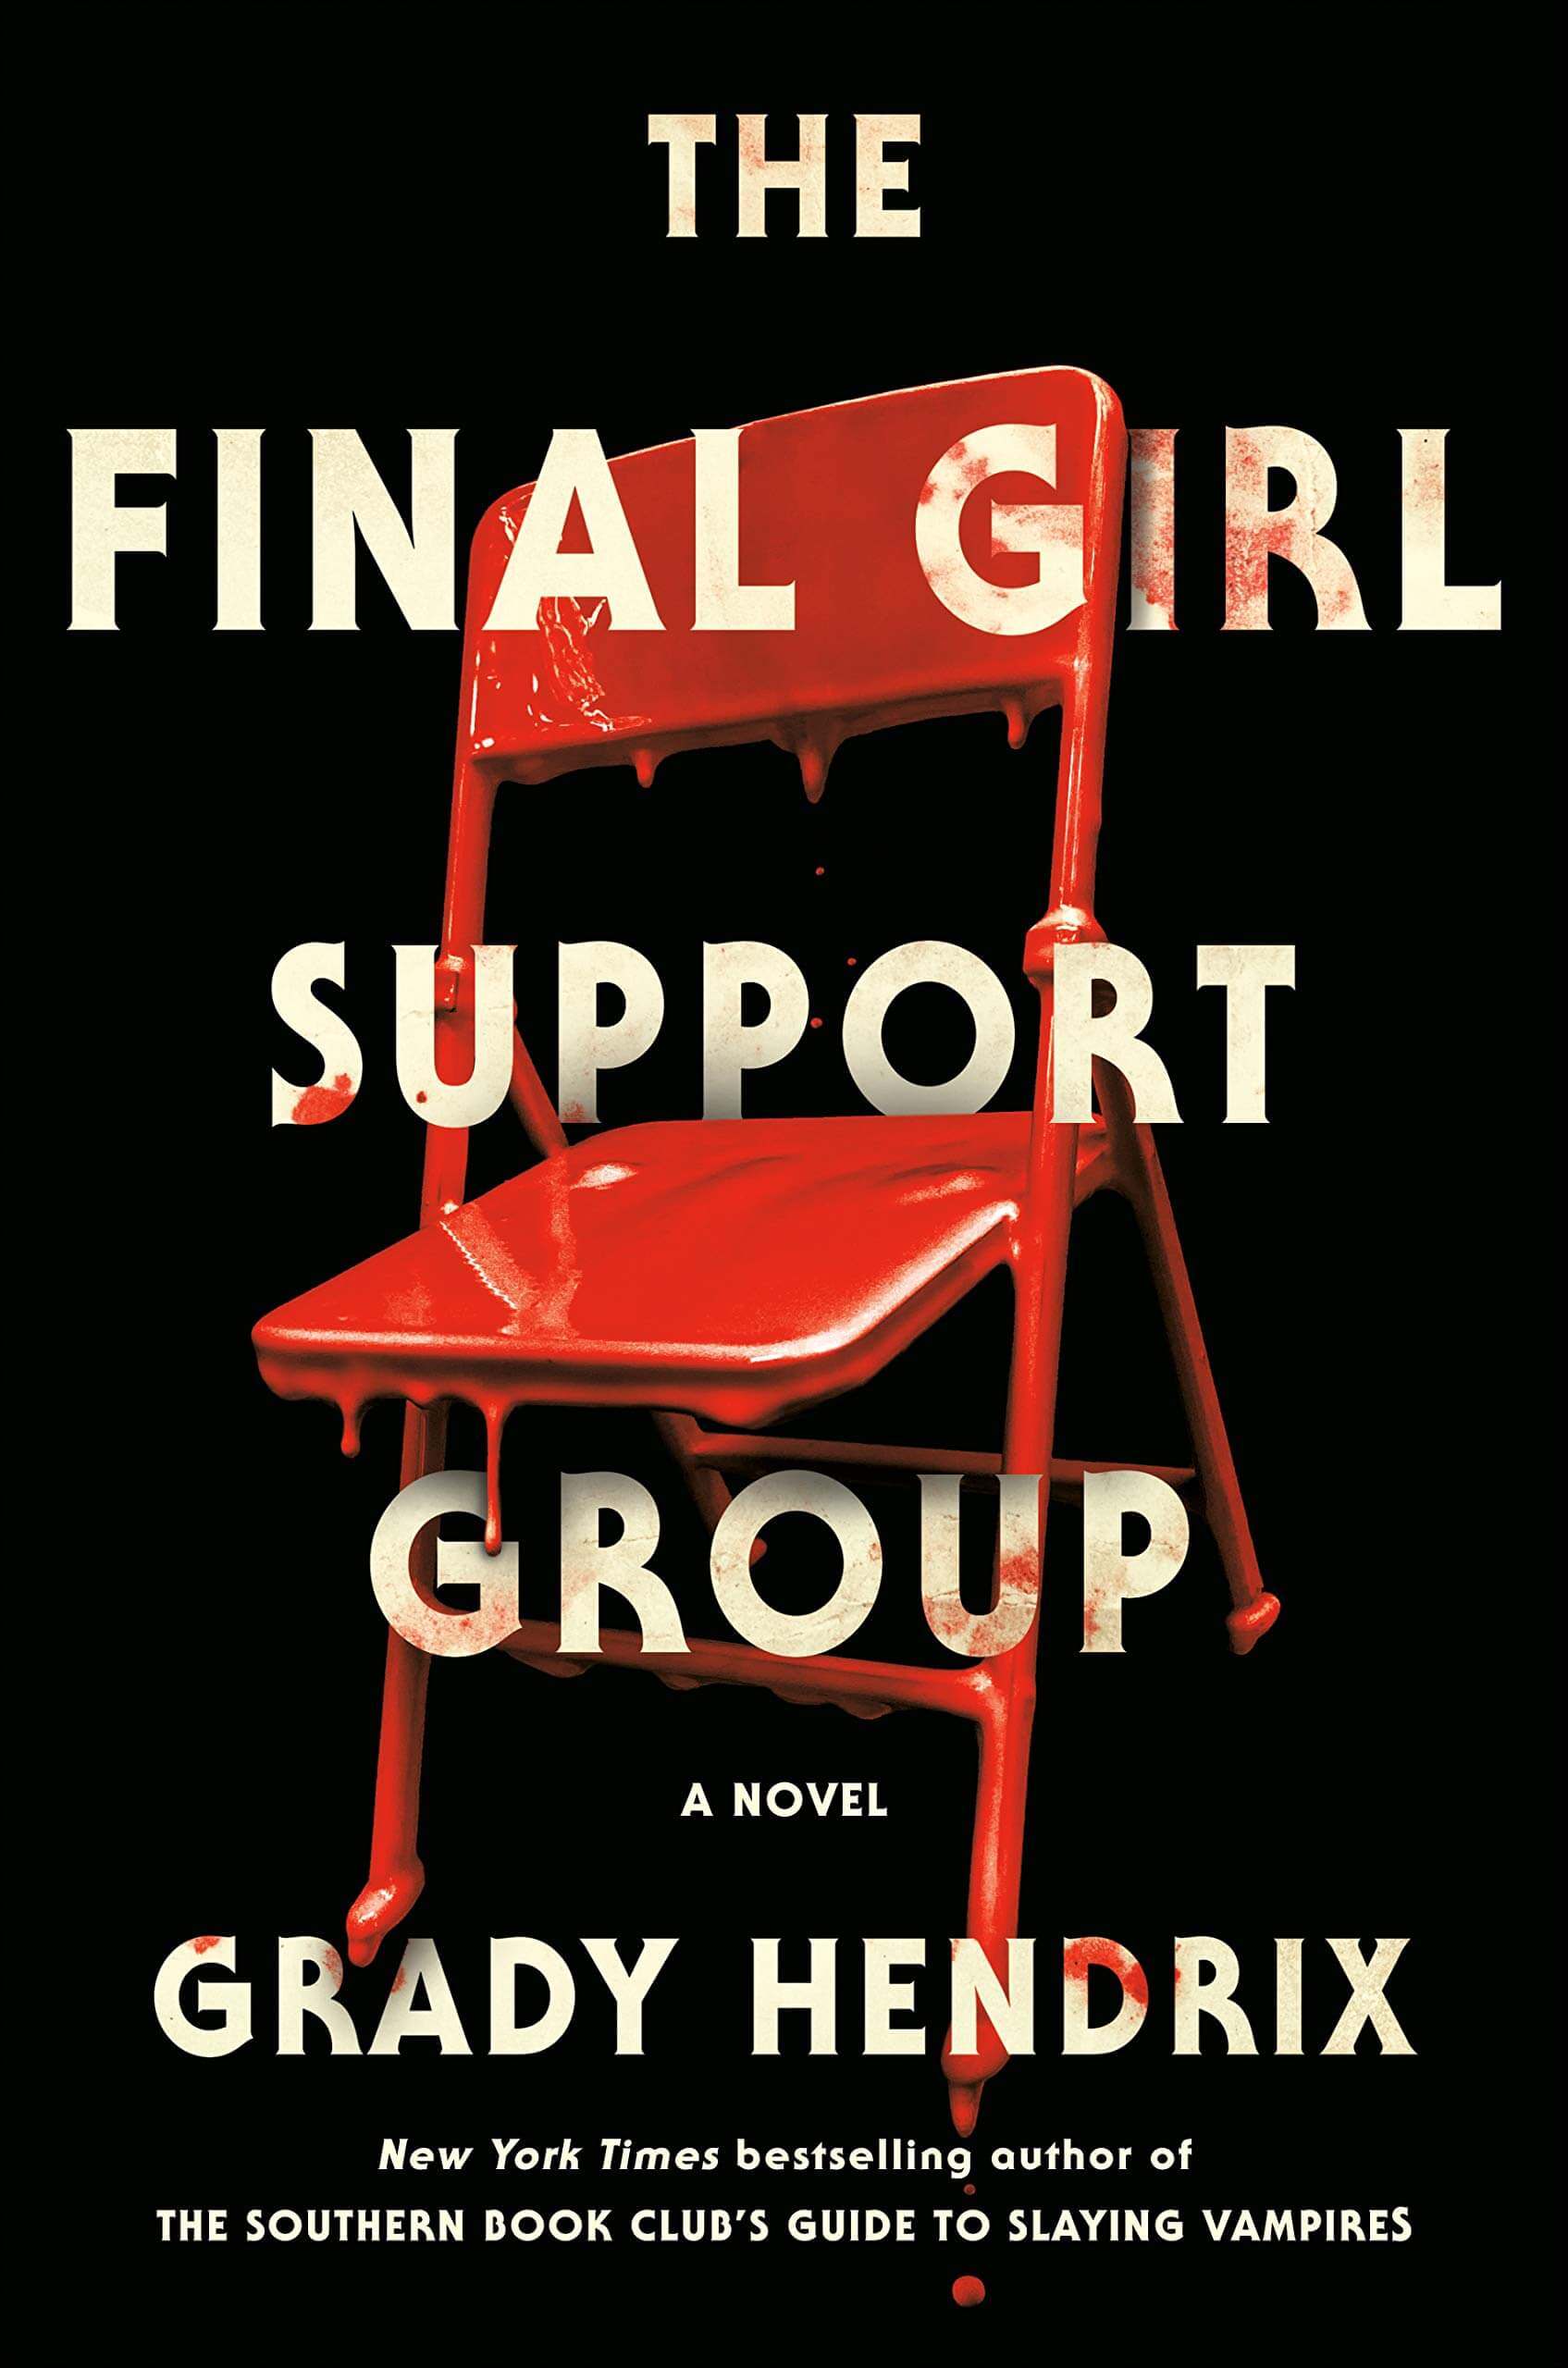 Cover of The Final Girl Support Group by Grady Hendrix